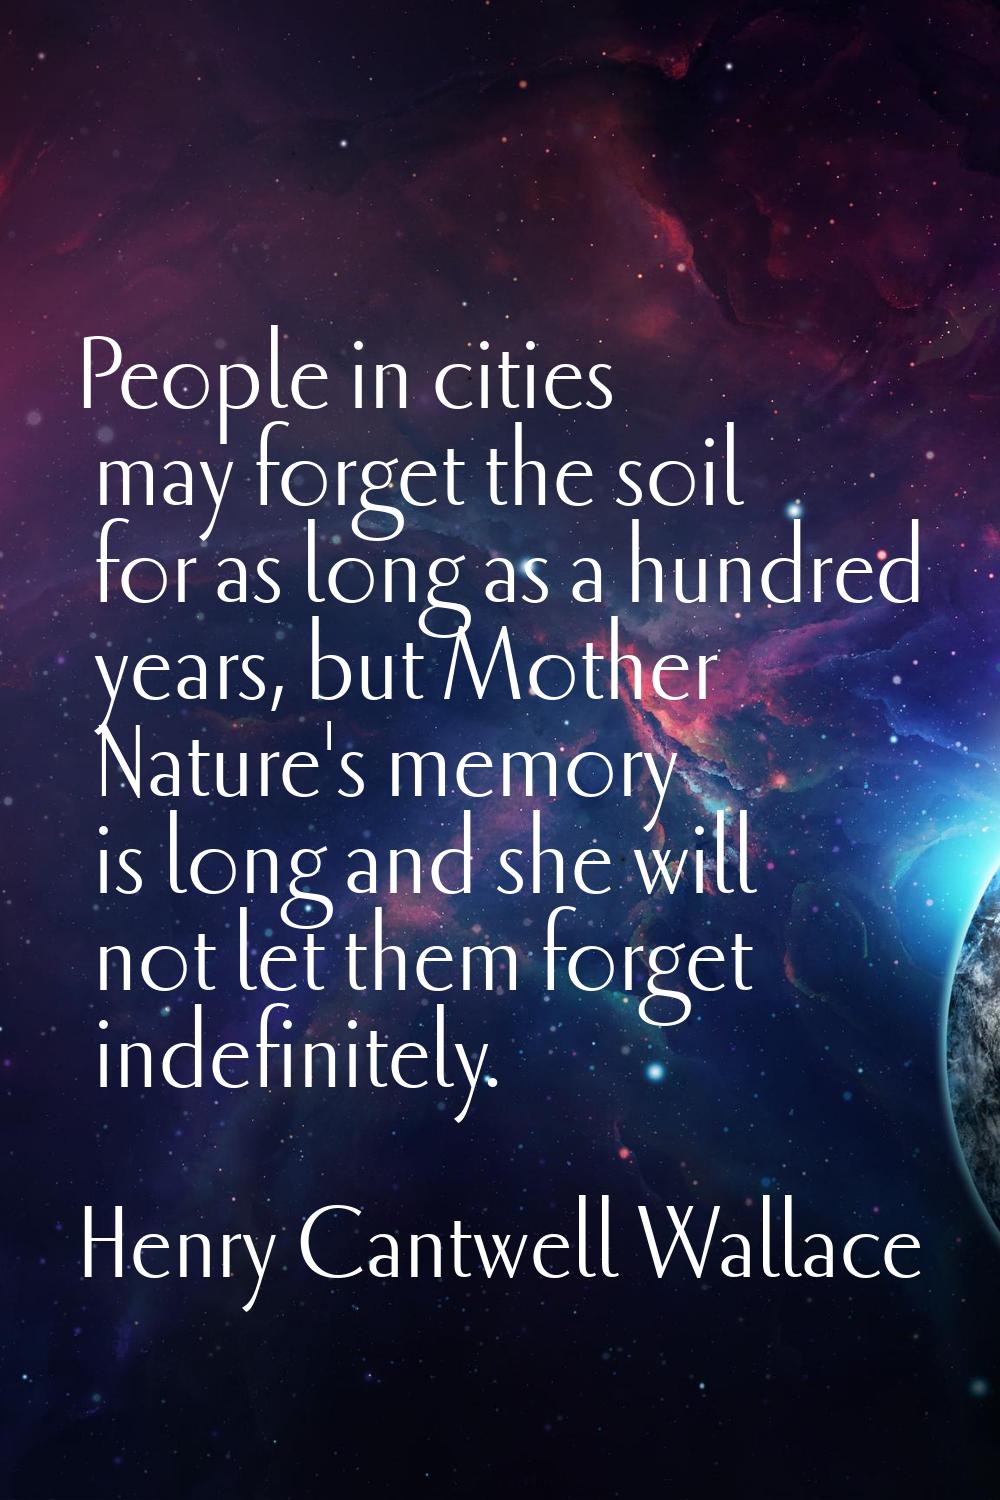 People in cities may forget the soil for as long as a hundred years, but Mother Nature's memory is 